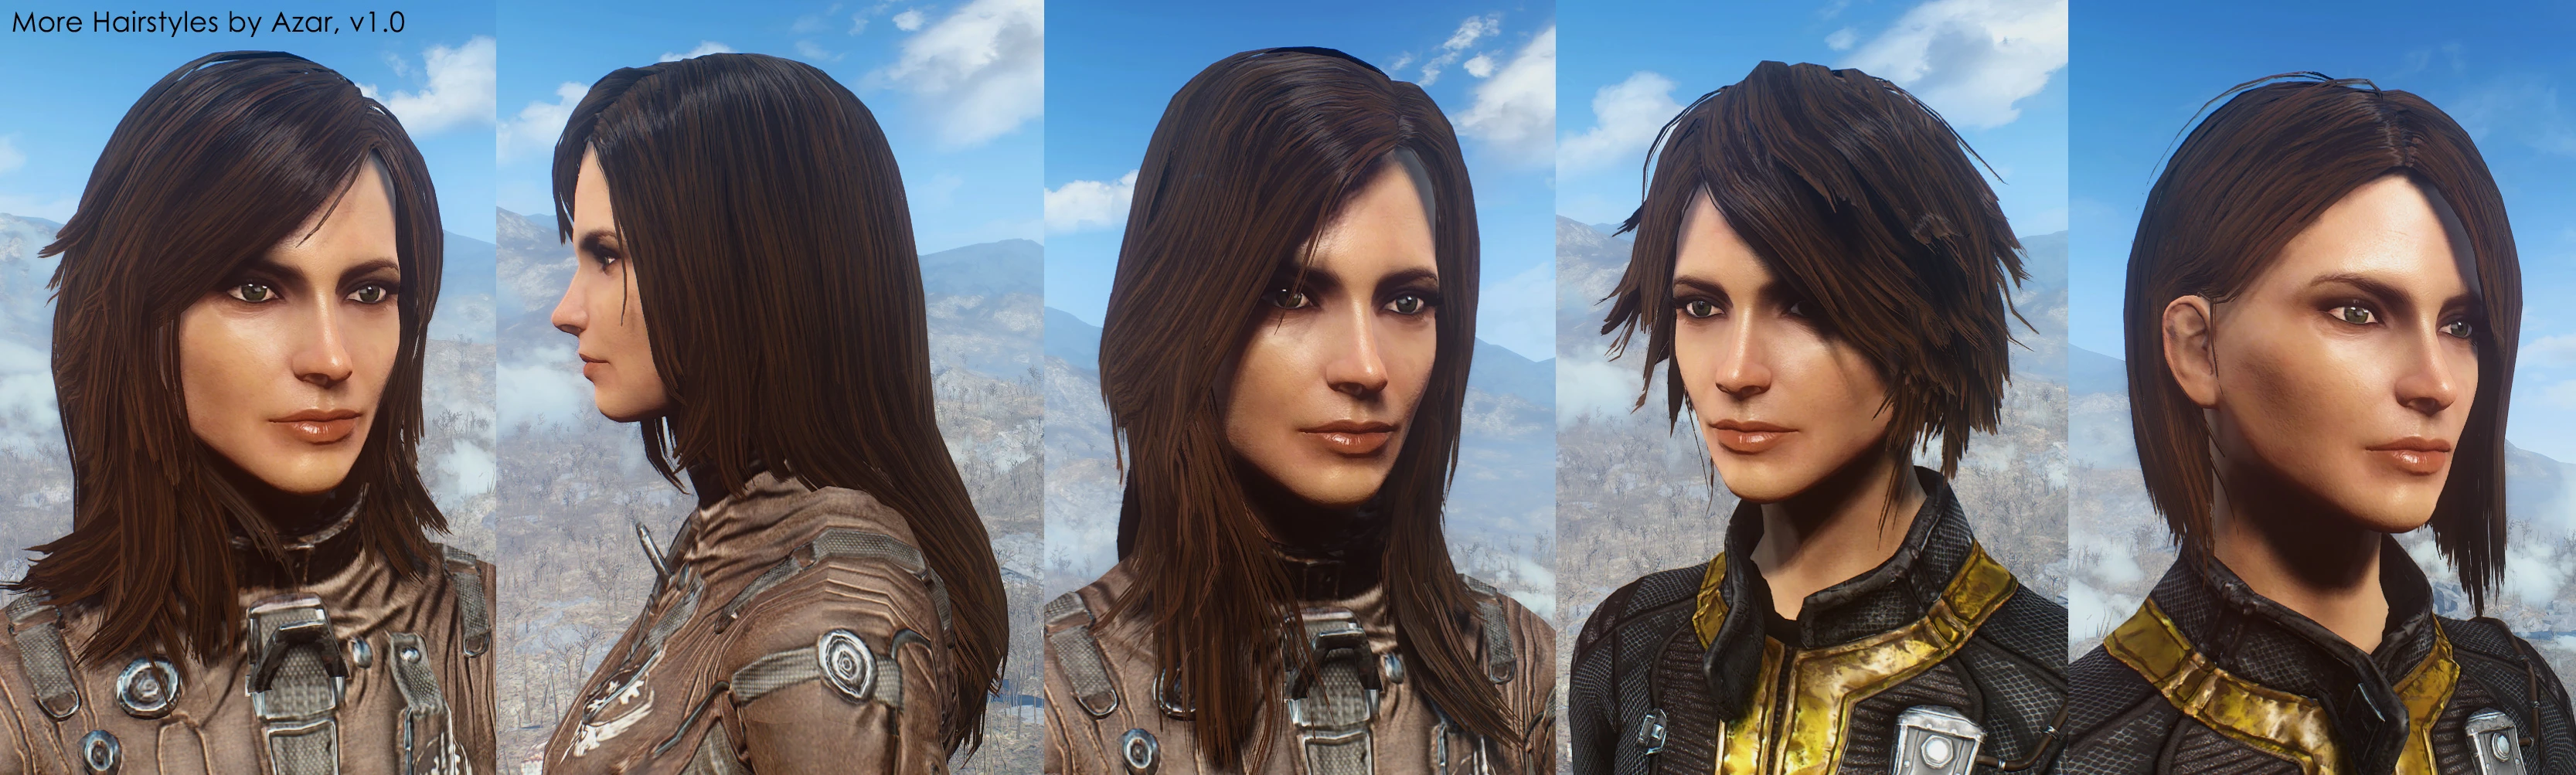 Fallout 4 lots more hairstyles фото 32